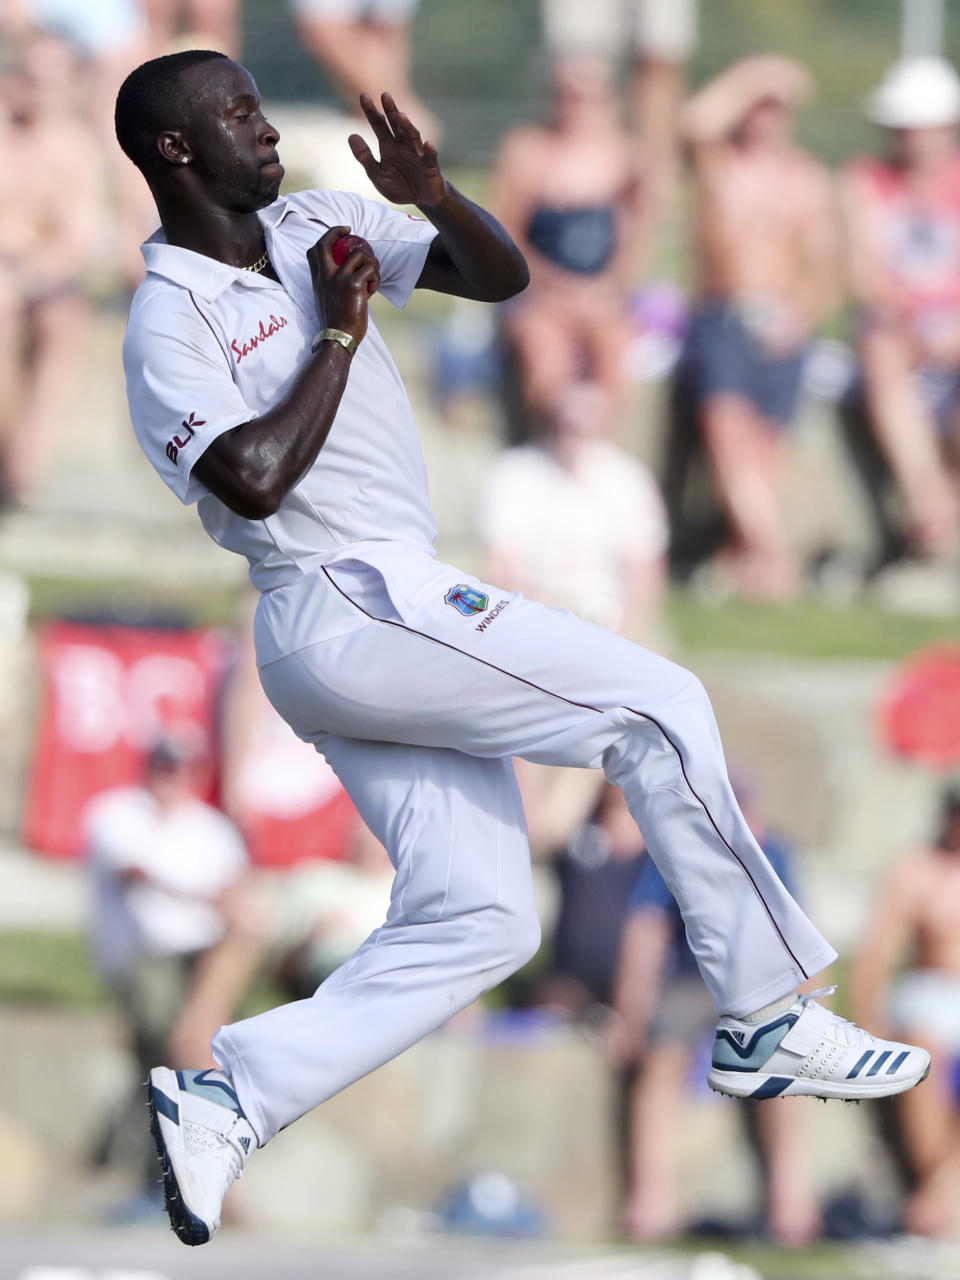 West Indies' Kemar Roach bowls against England during day one of the second Test cricket match at the Sir Vivian Richards Stadium in North Sound, Antigua and Barbuda, Thursday, Jan. 31, 2019. (AP Photo/Ricardo Mazalan)